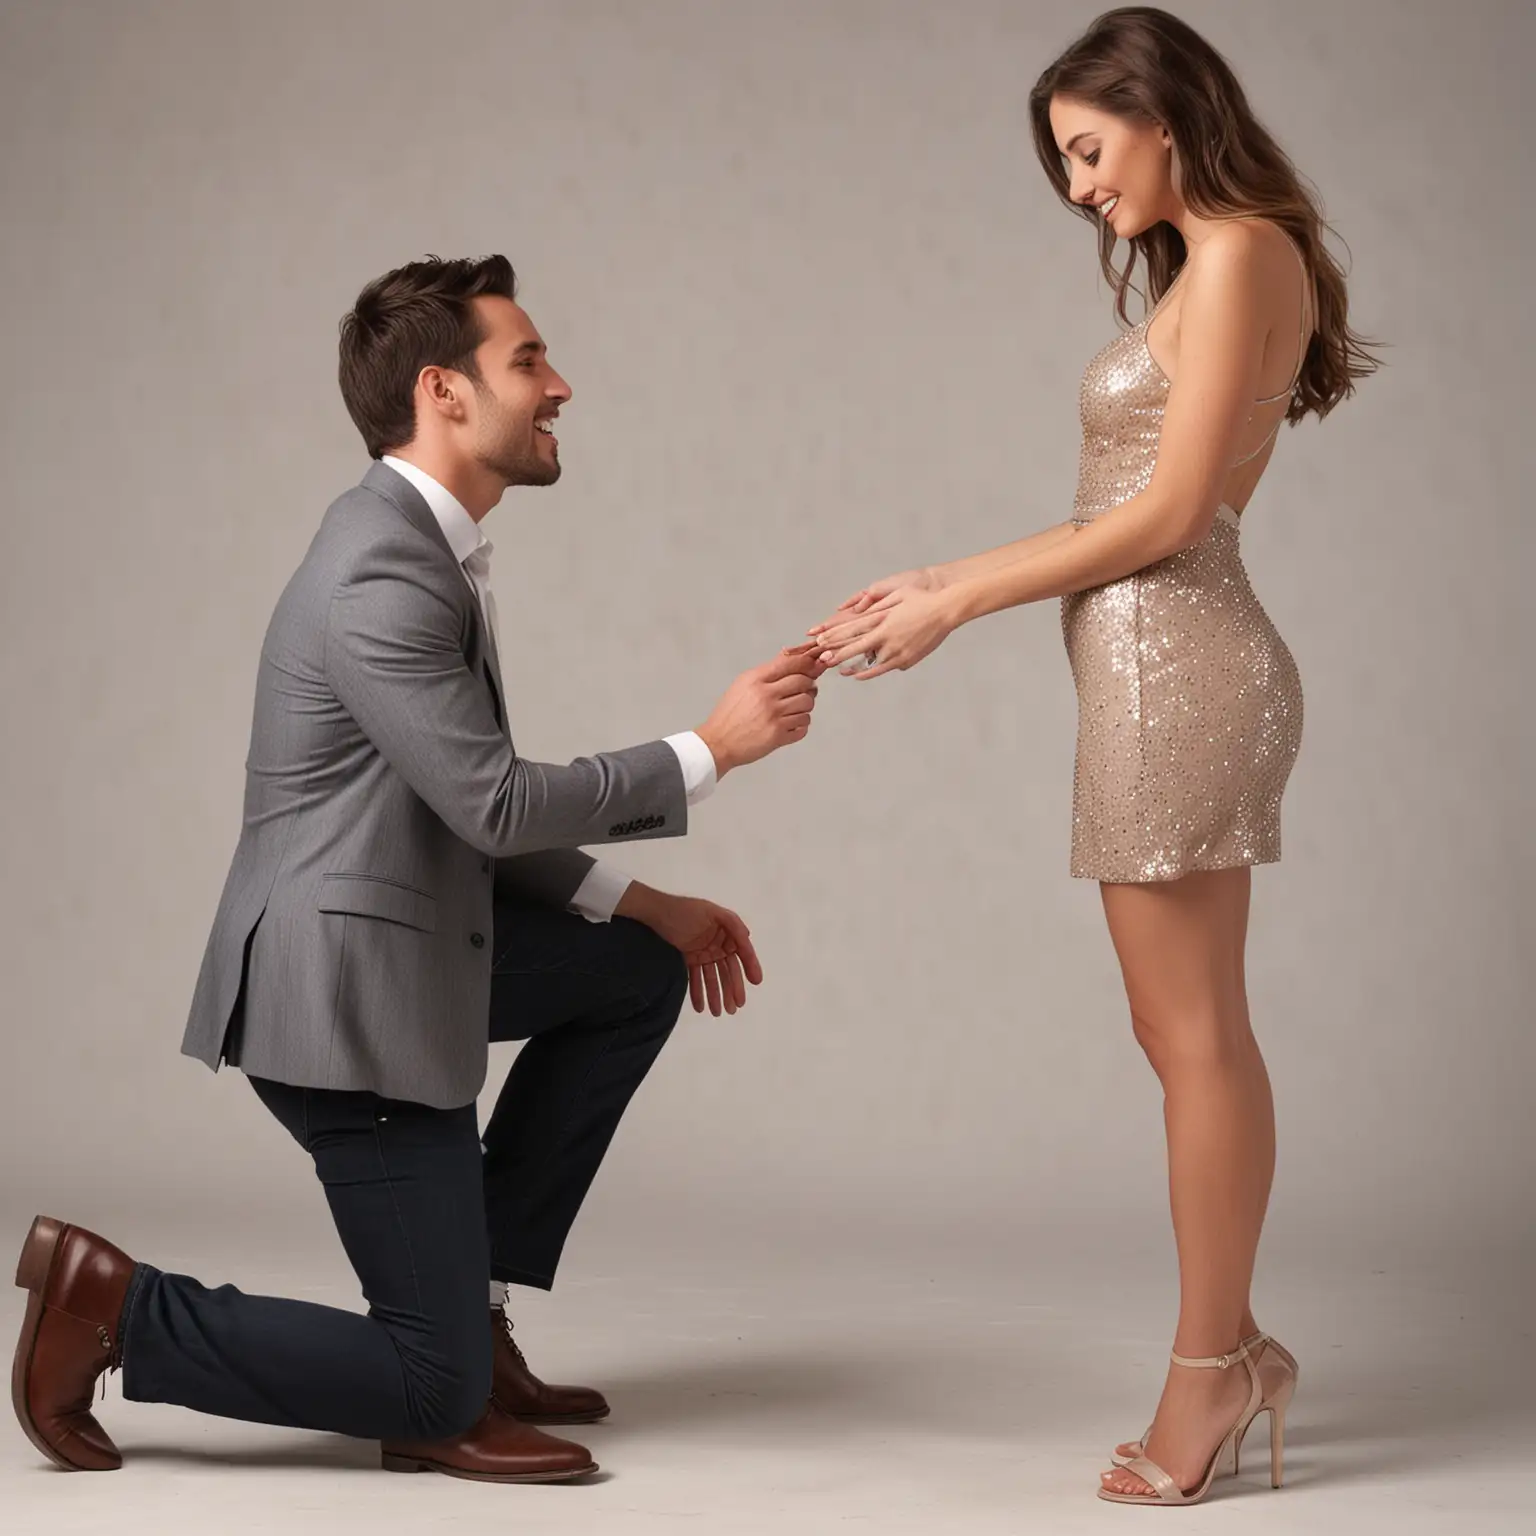 Romantic Marriage Proposal with a Stunning Model